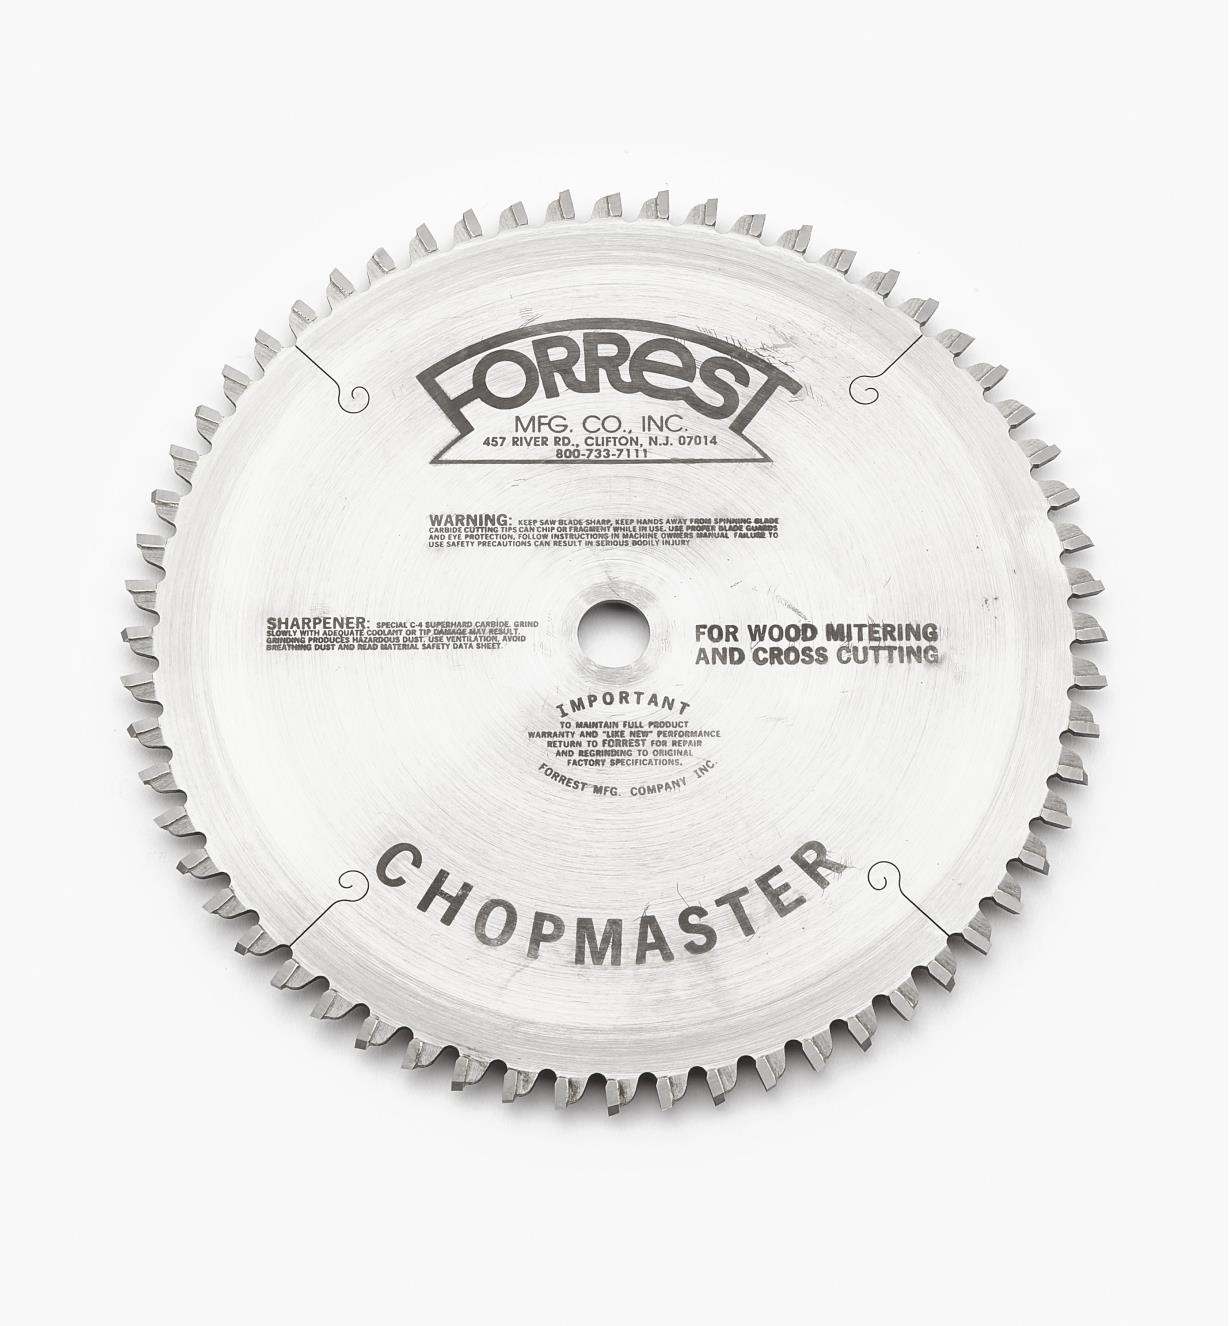 15T4150 - 8.5" x 60-Tooth Chopmaster, 3/32" Kerf